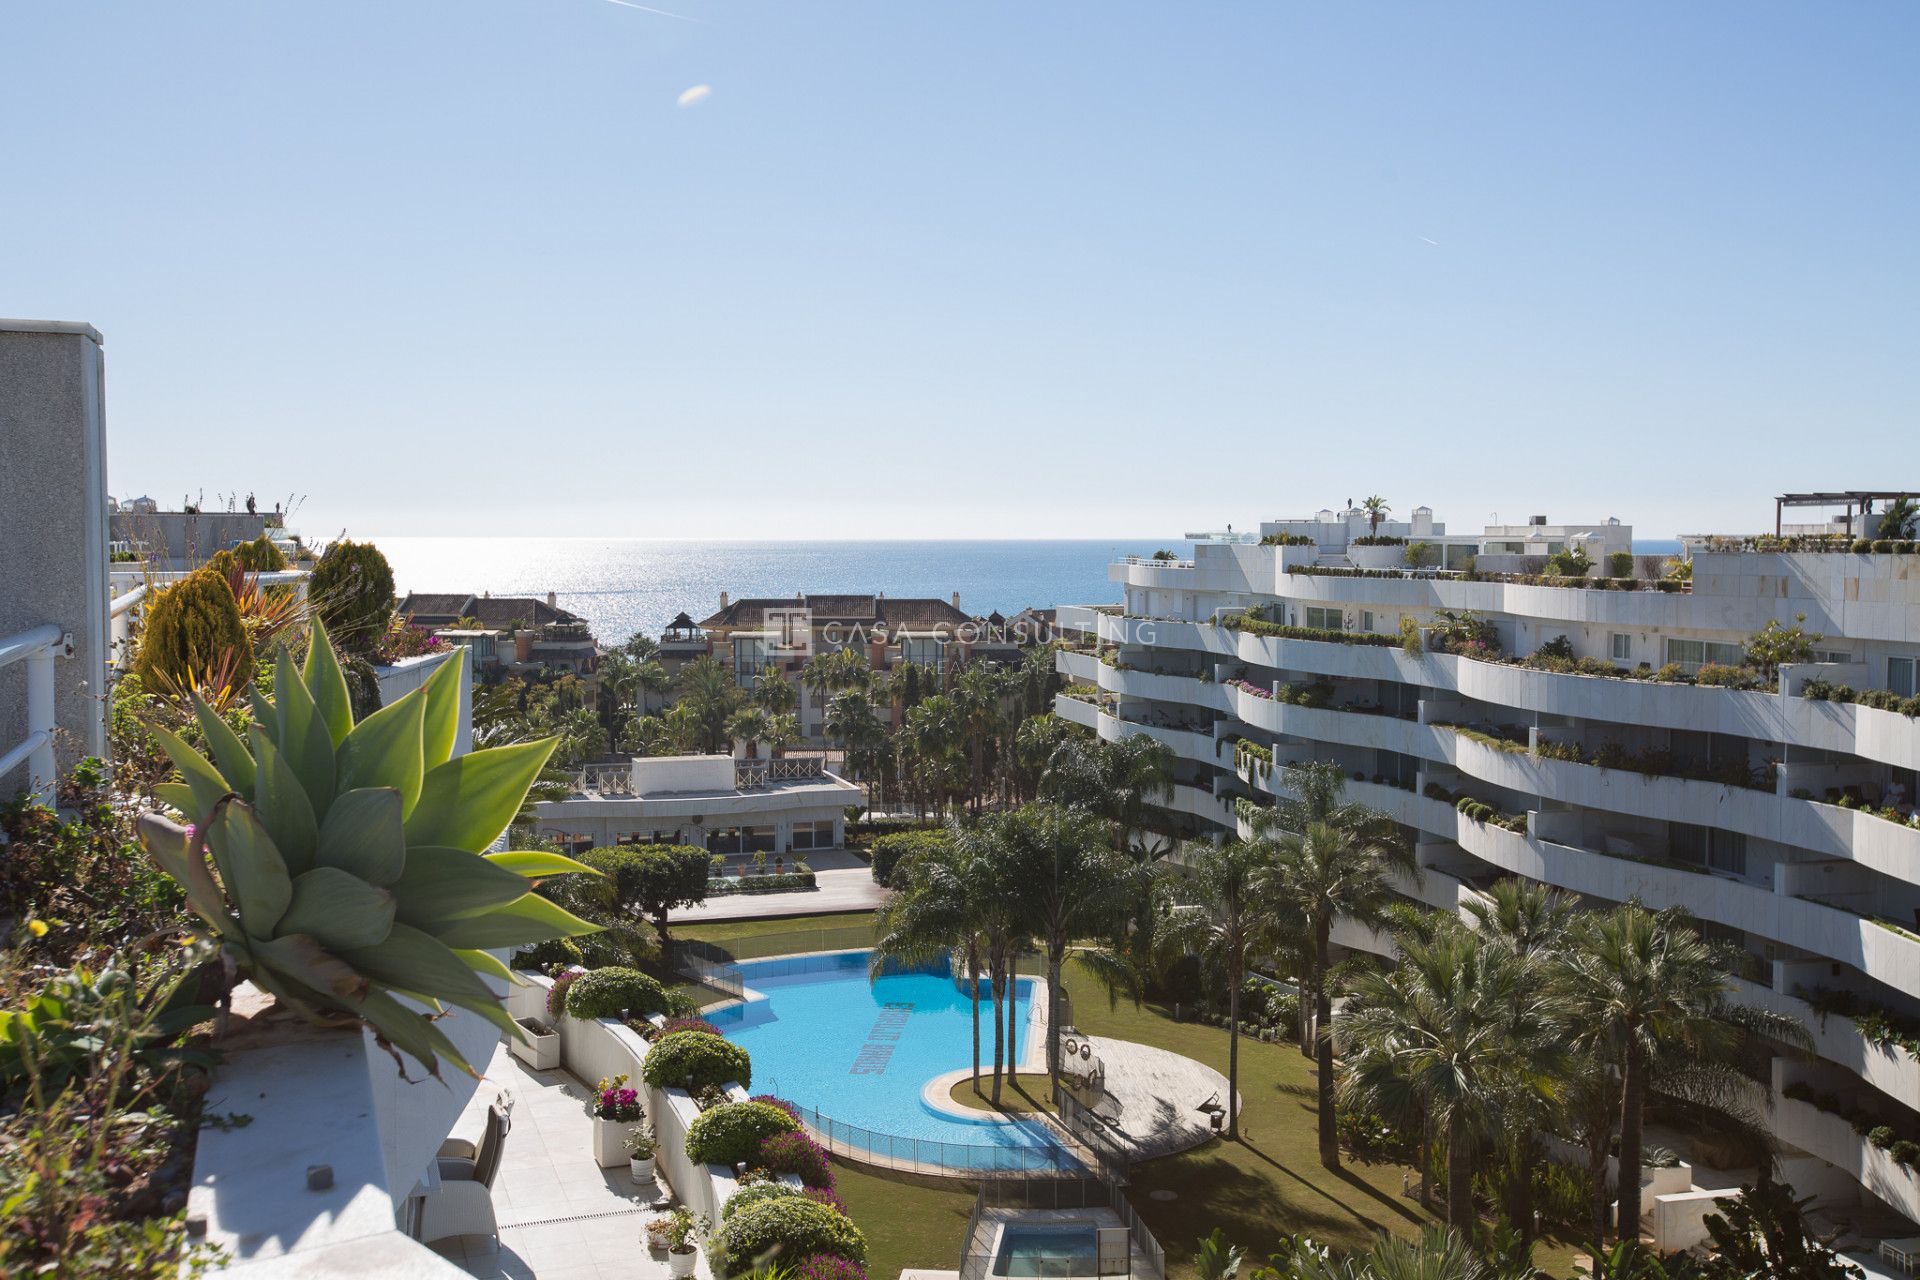 Luxurious Duplex Penthouse located on the beach in Puerto Banus, Marbella 